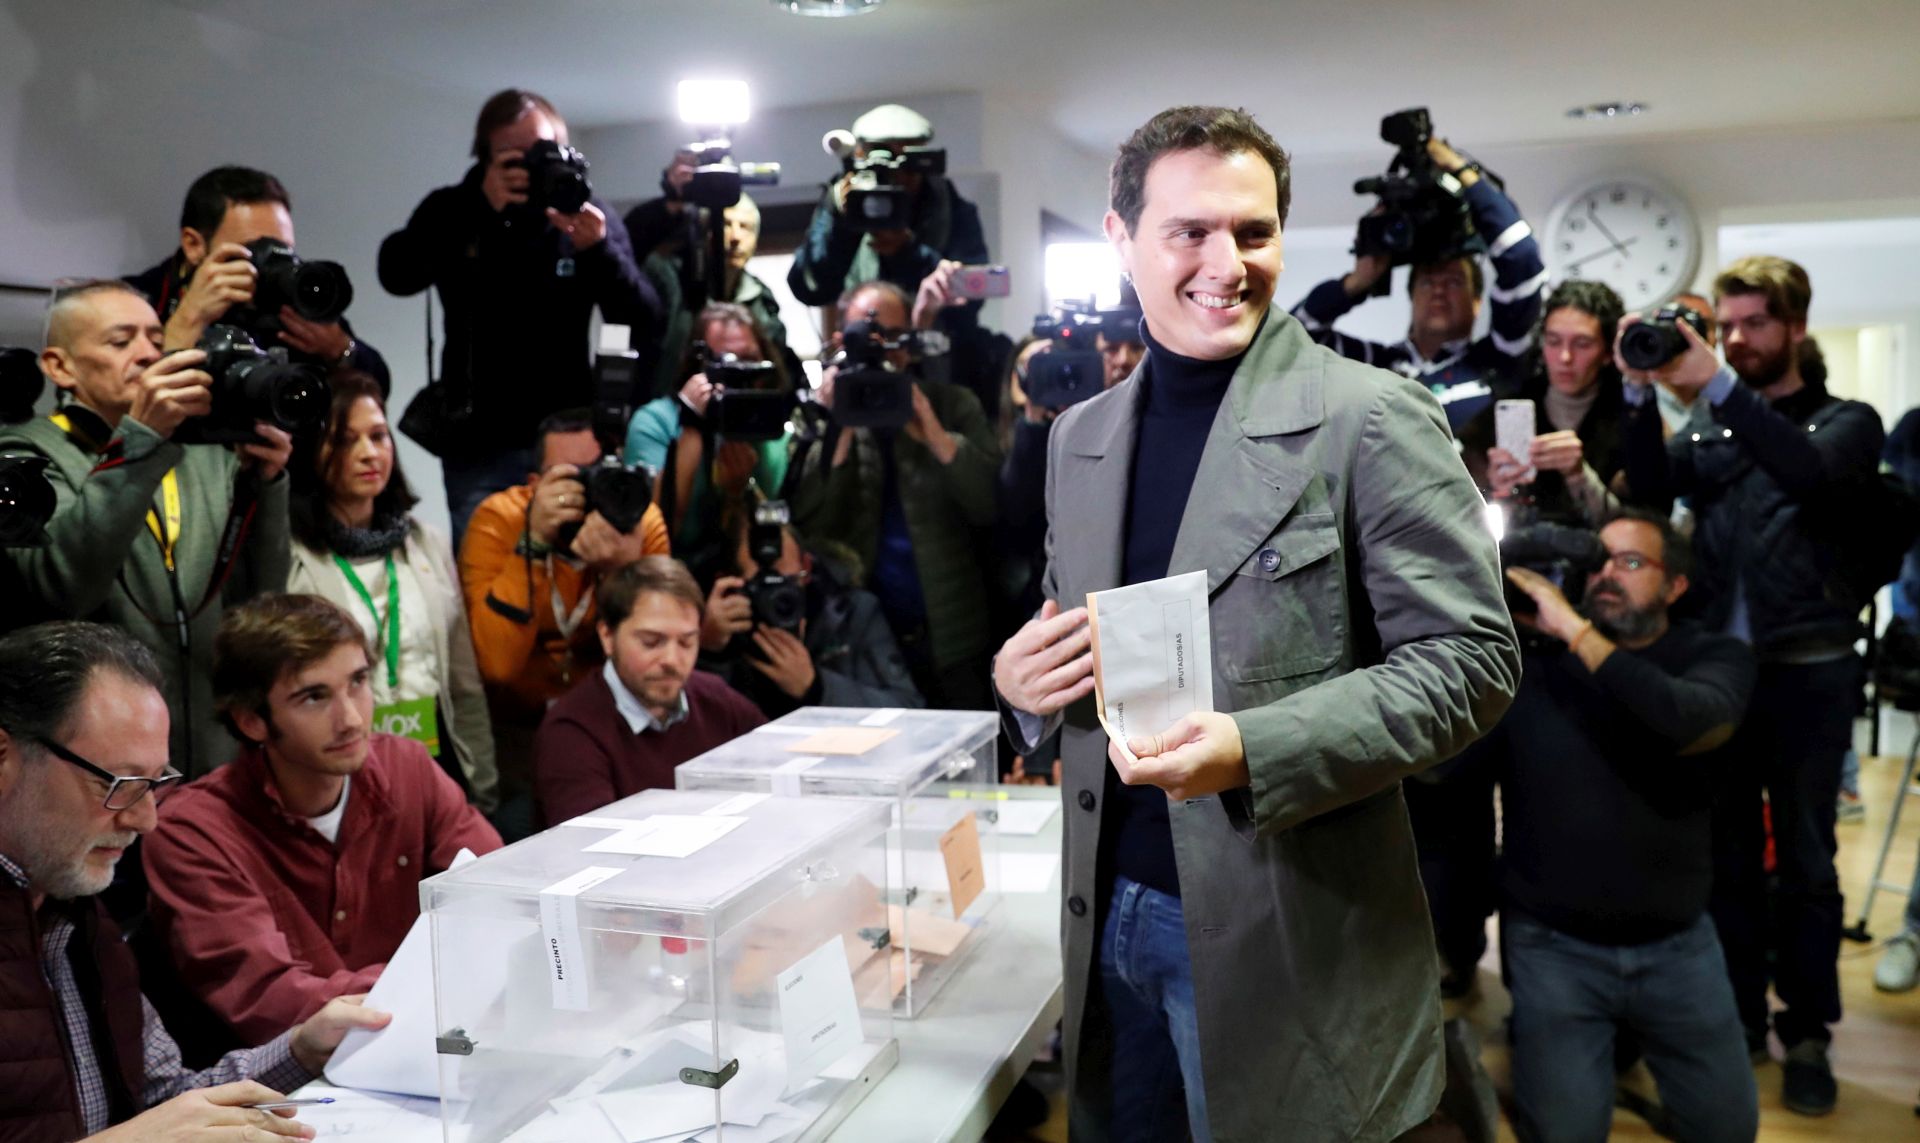 epa07985592 Leader of Spanish Ciudadanos Party Albert Rivera (C) casts his vote at a polling station in Pozuelo de Alarcon, Madrid, Spain, 10 November 2019. Spain holds general elections after Sanchez failed to form government following 28 April elections.  EPA/ZIPI